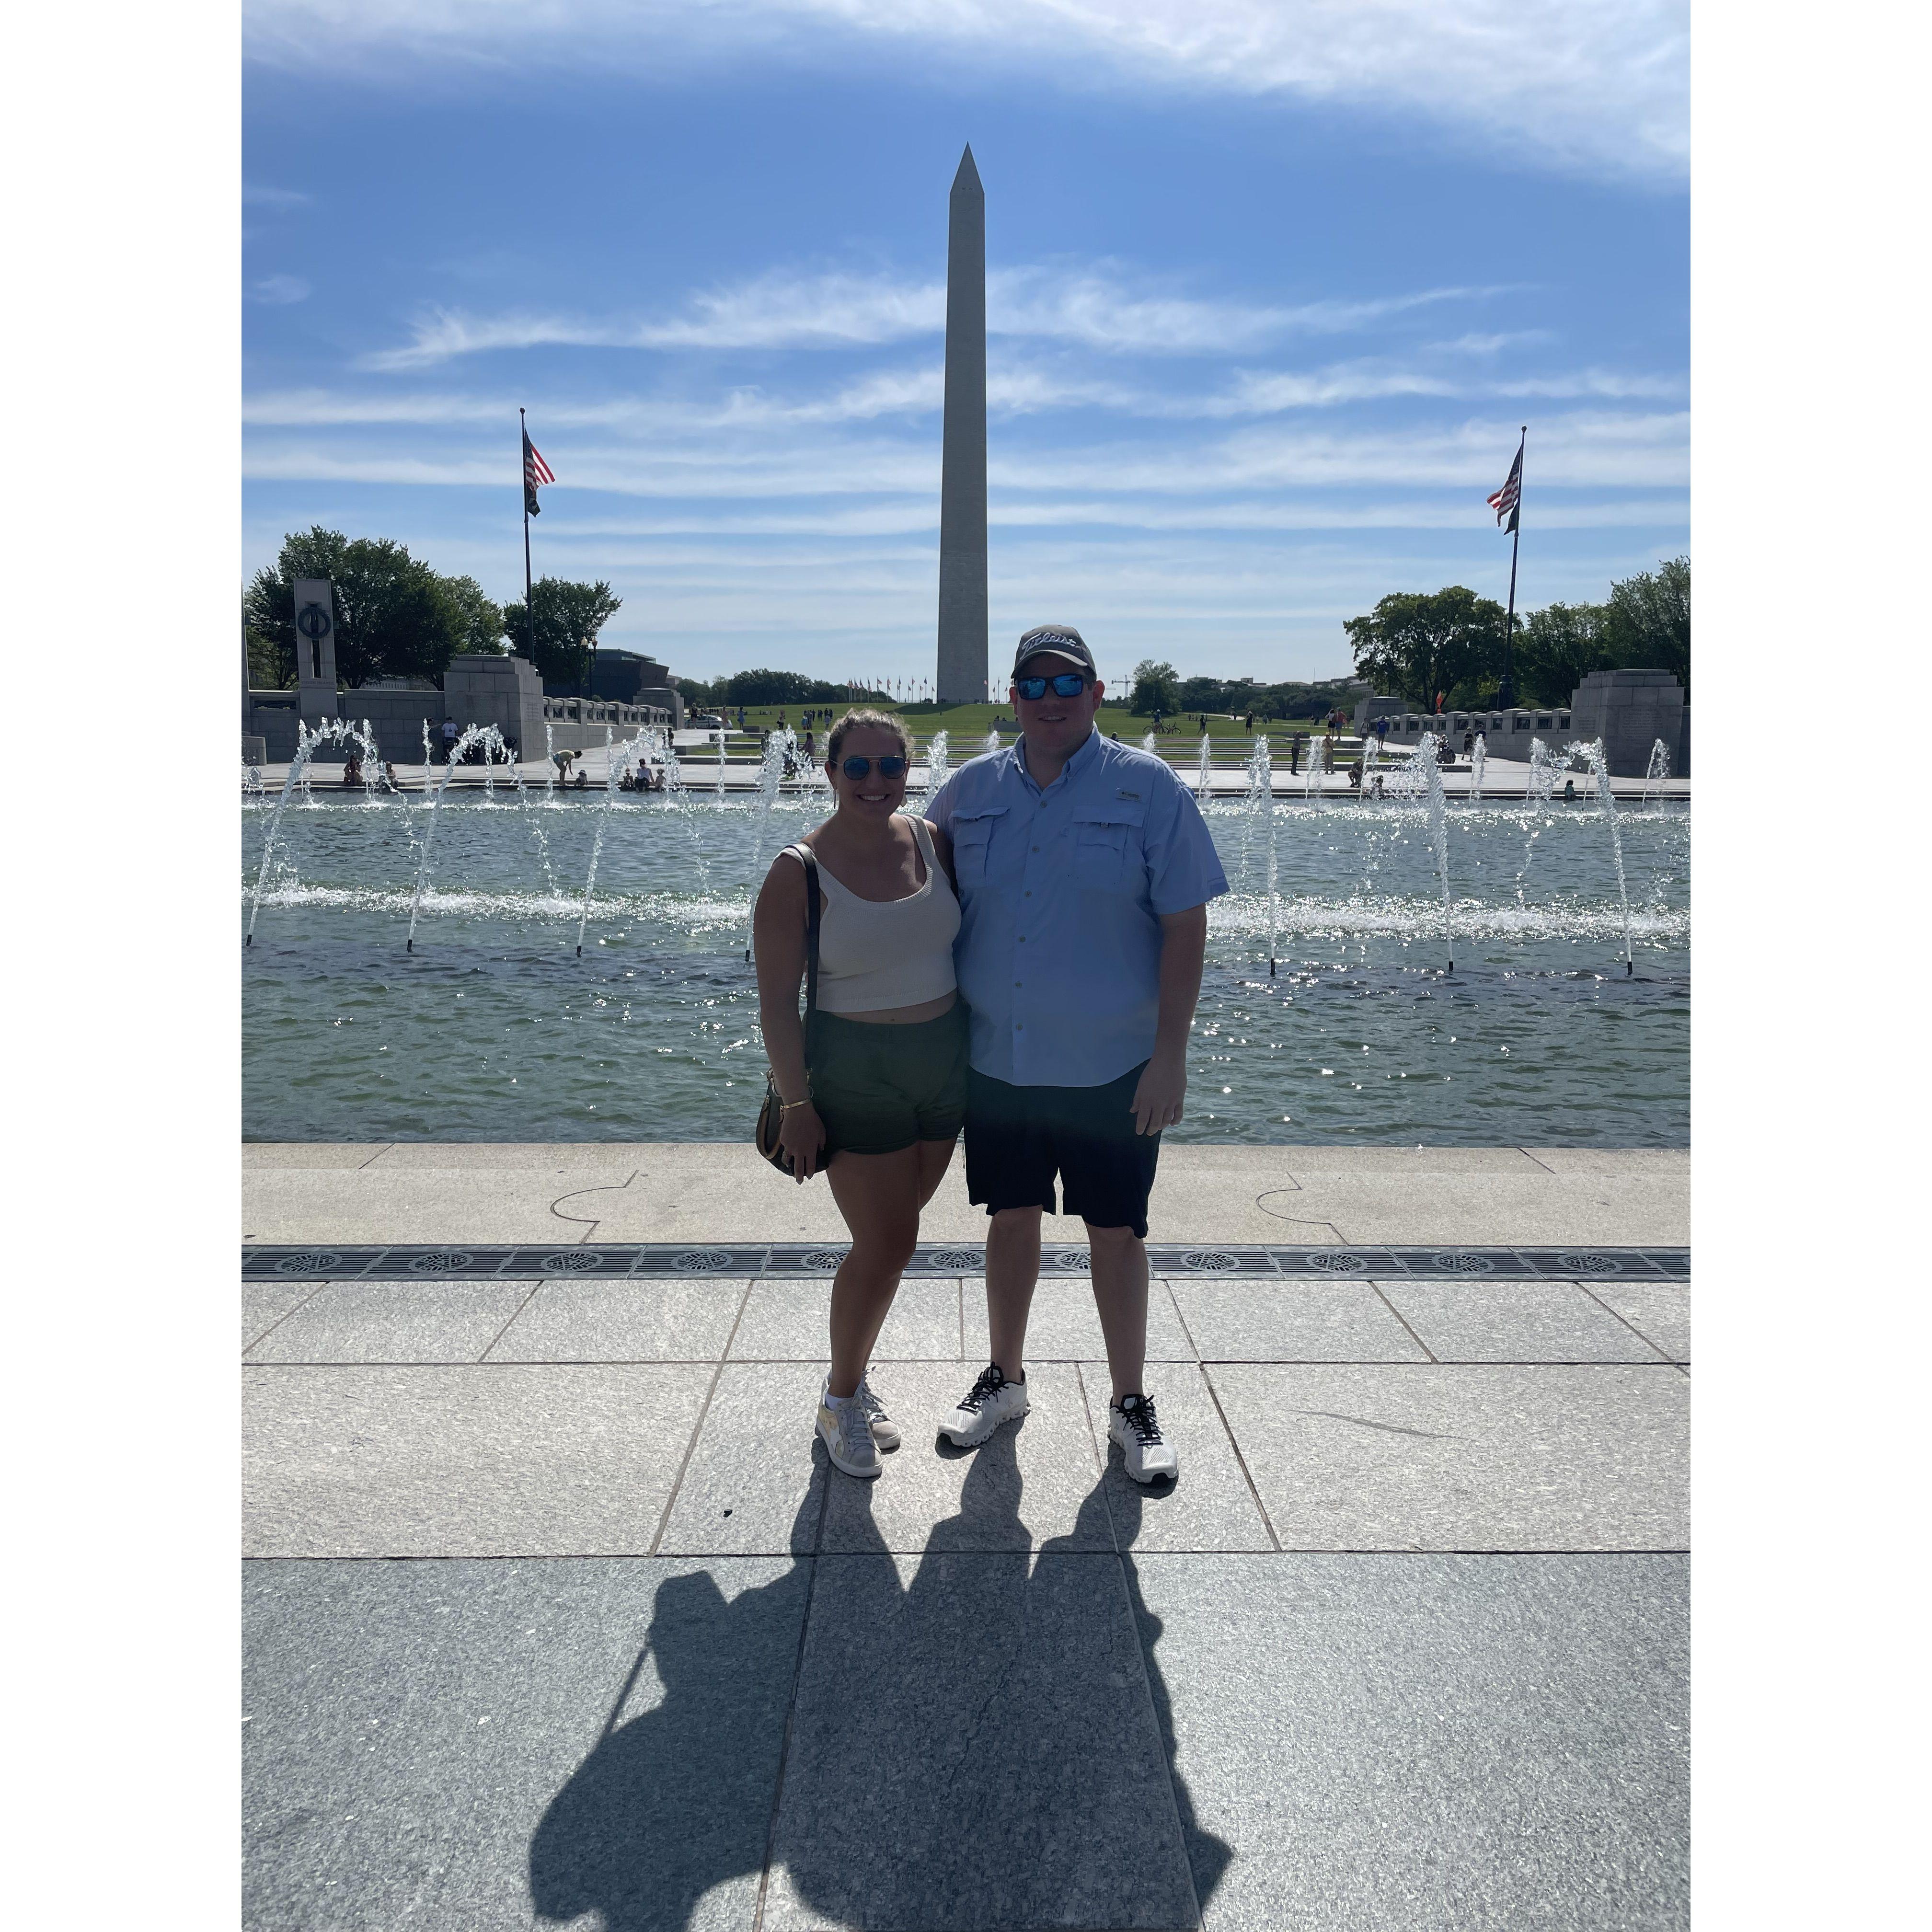 Our first trip to DC and Maryland together!